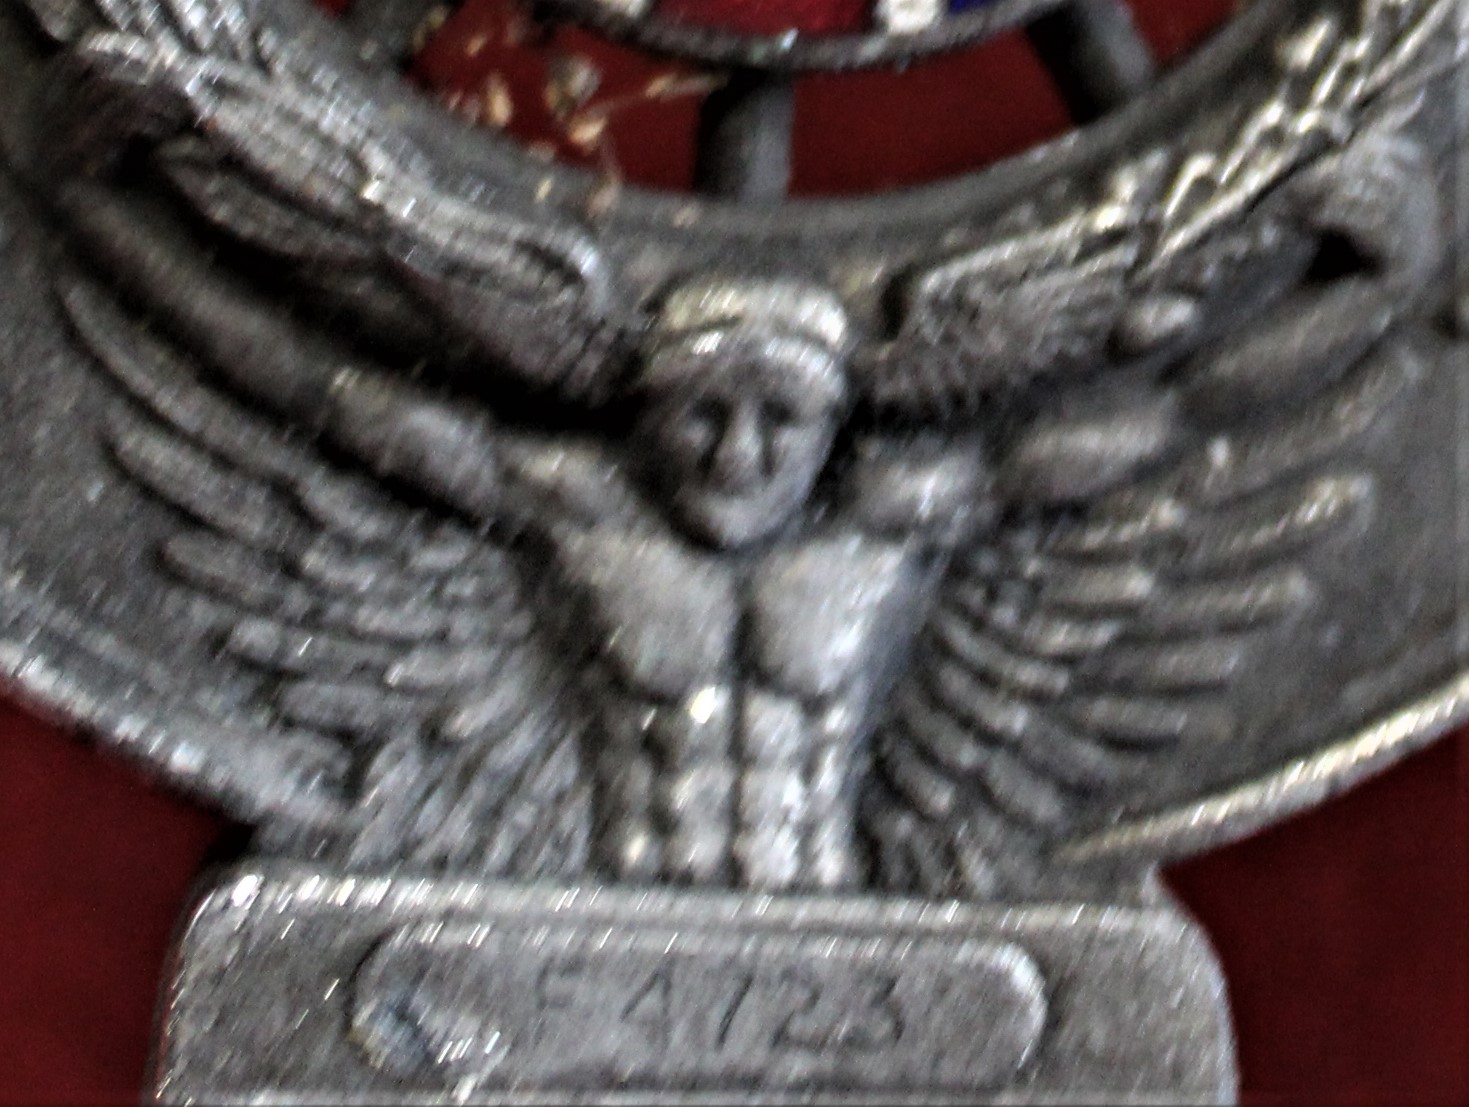 Royal Automobile Club Association Enamel Car Badge F4723, c.1930s, with fitting for attaching to a - Image 3 of 3